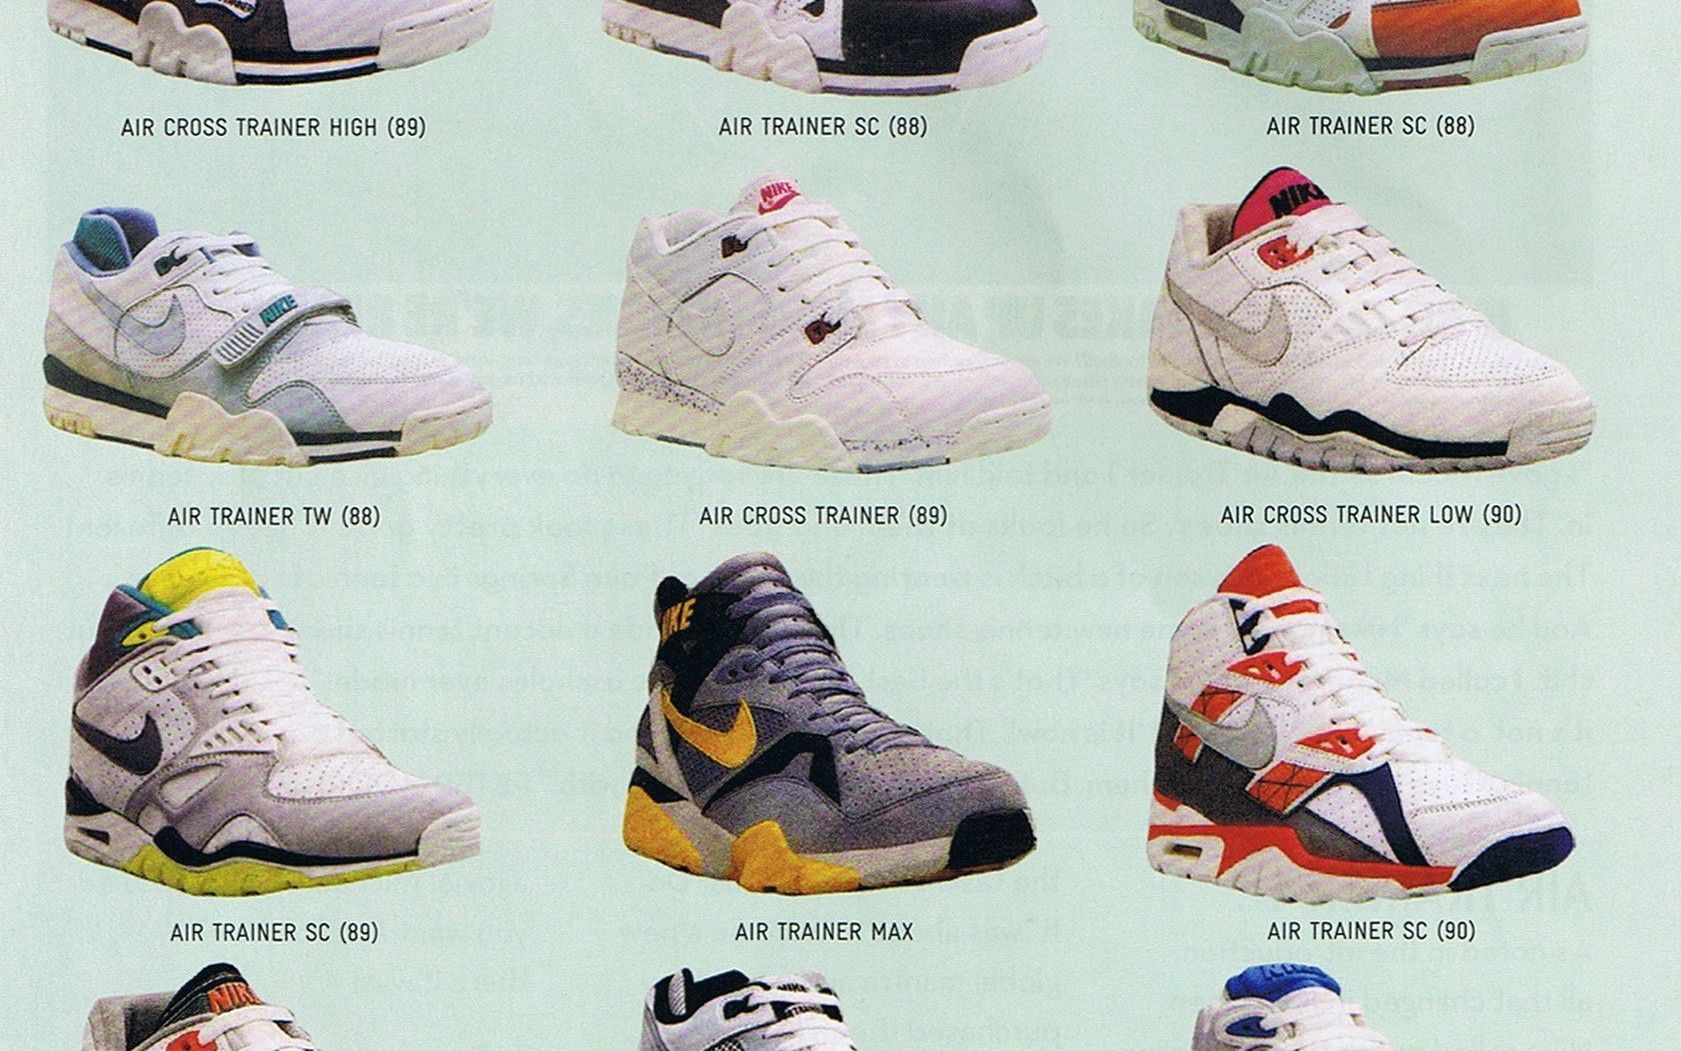 historical silhouette from which Nike should again